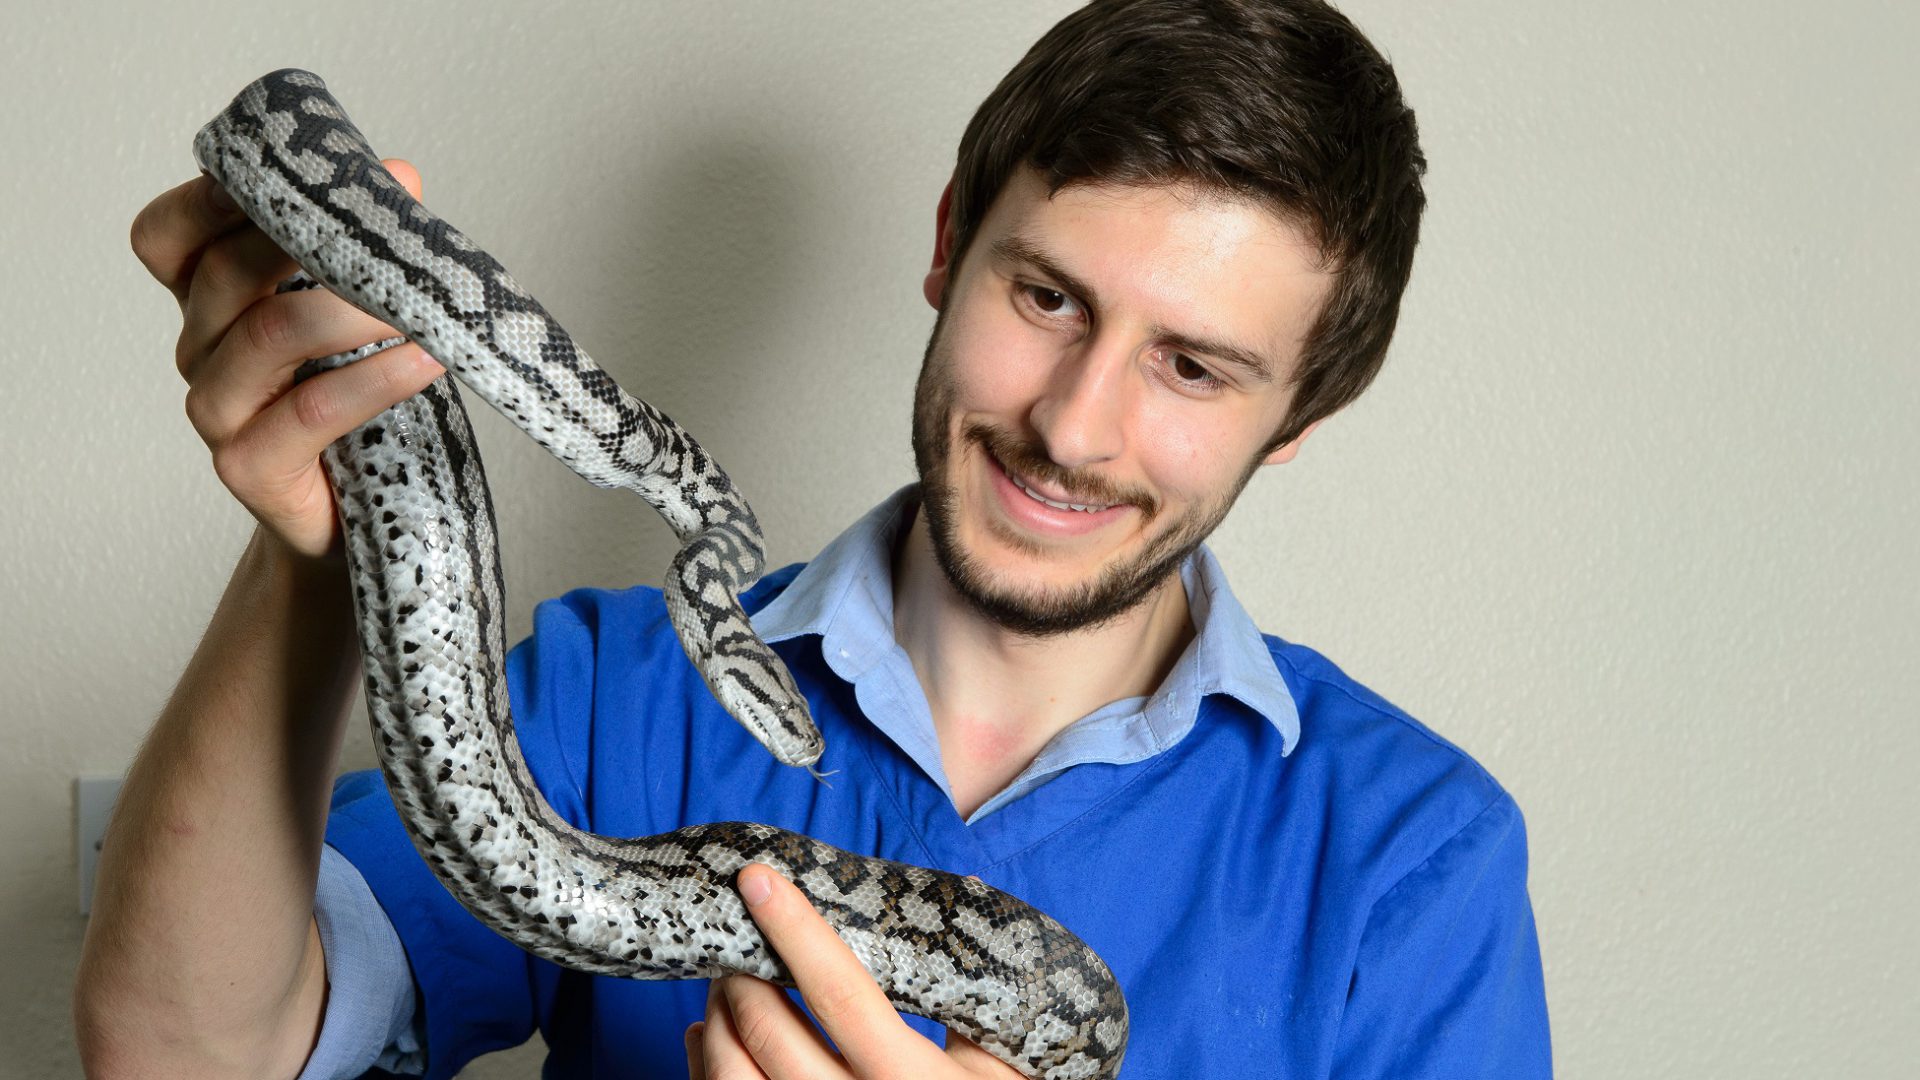 Exotics expert to treat everything from snakes to salamanders at new hospital